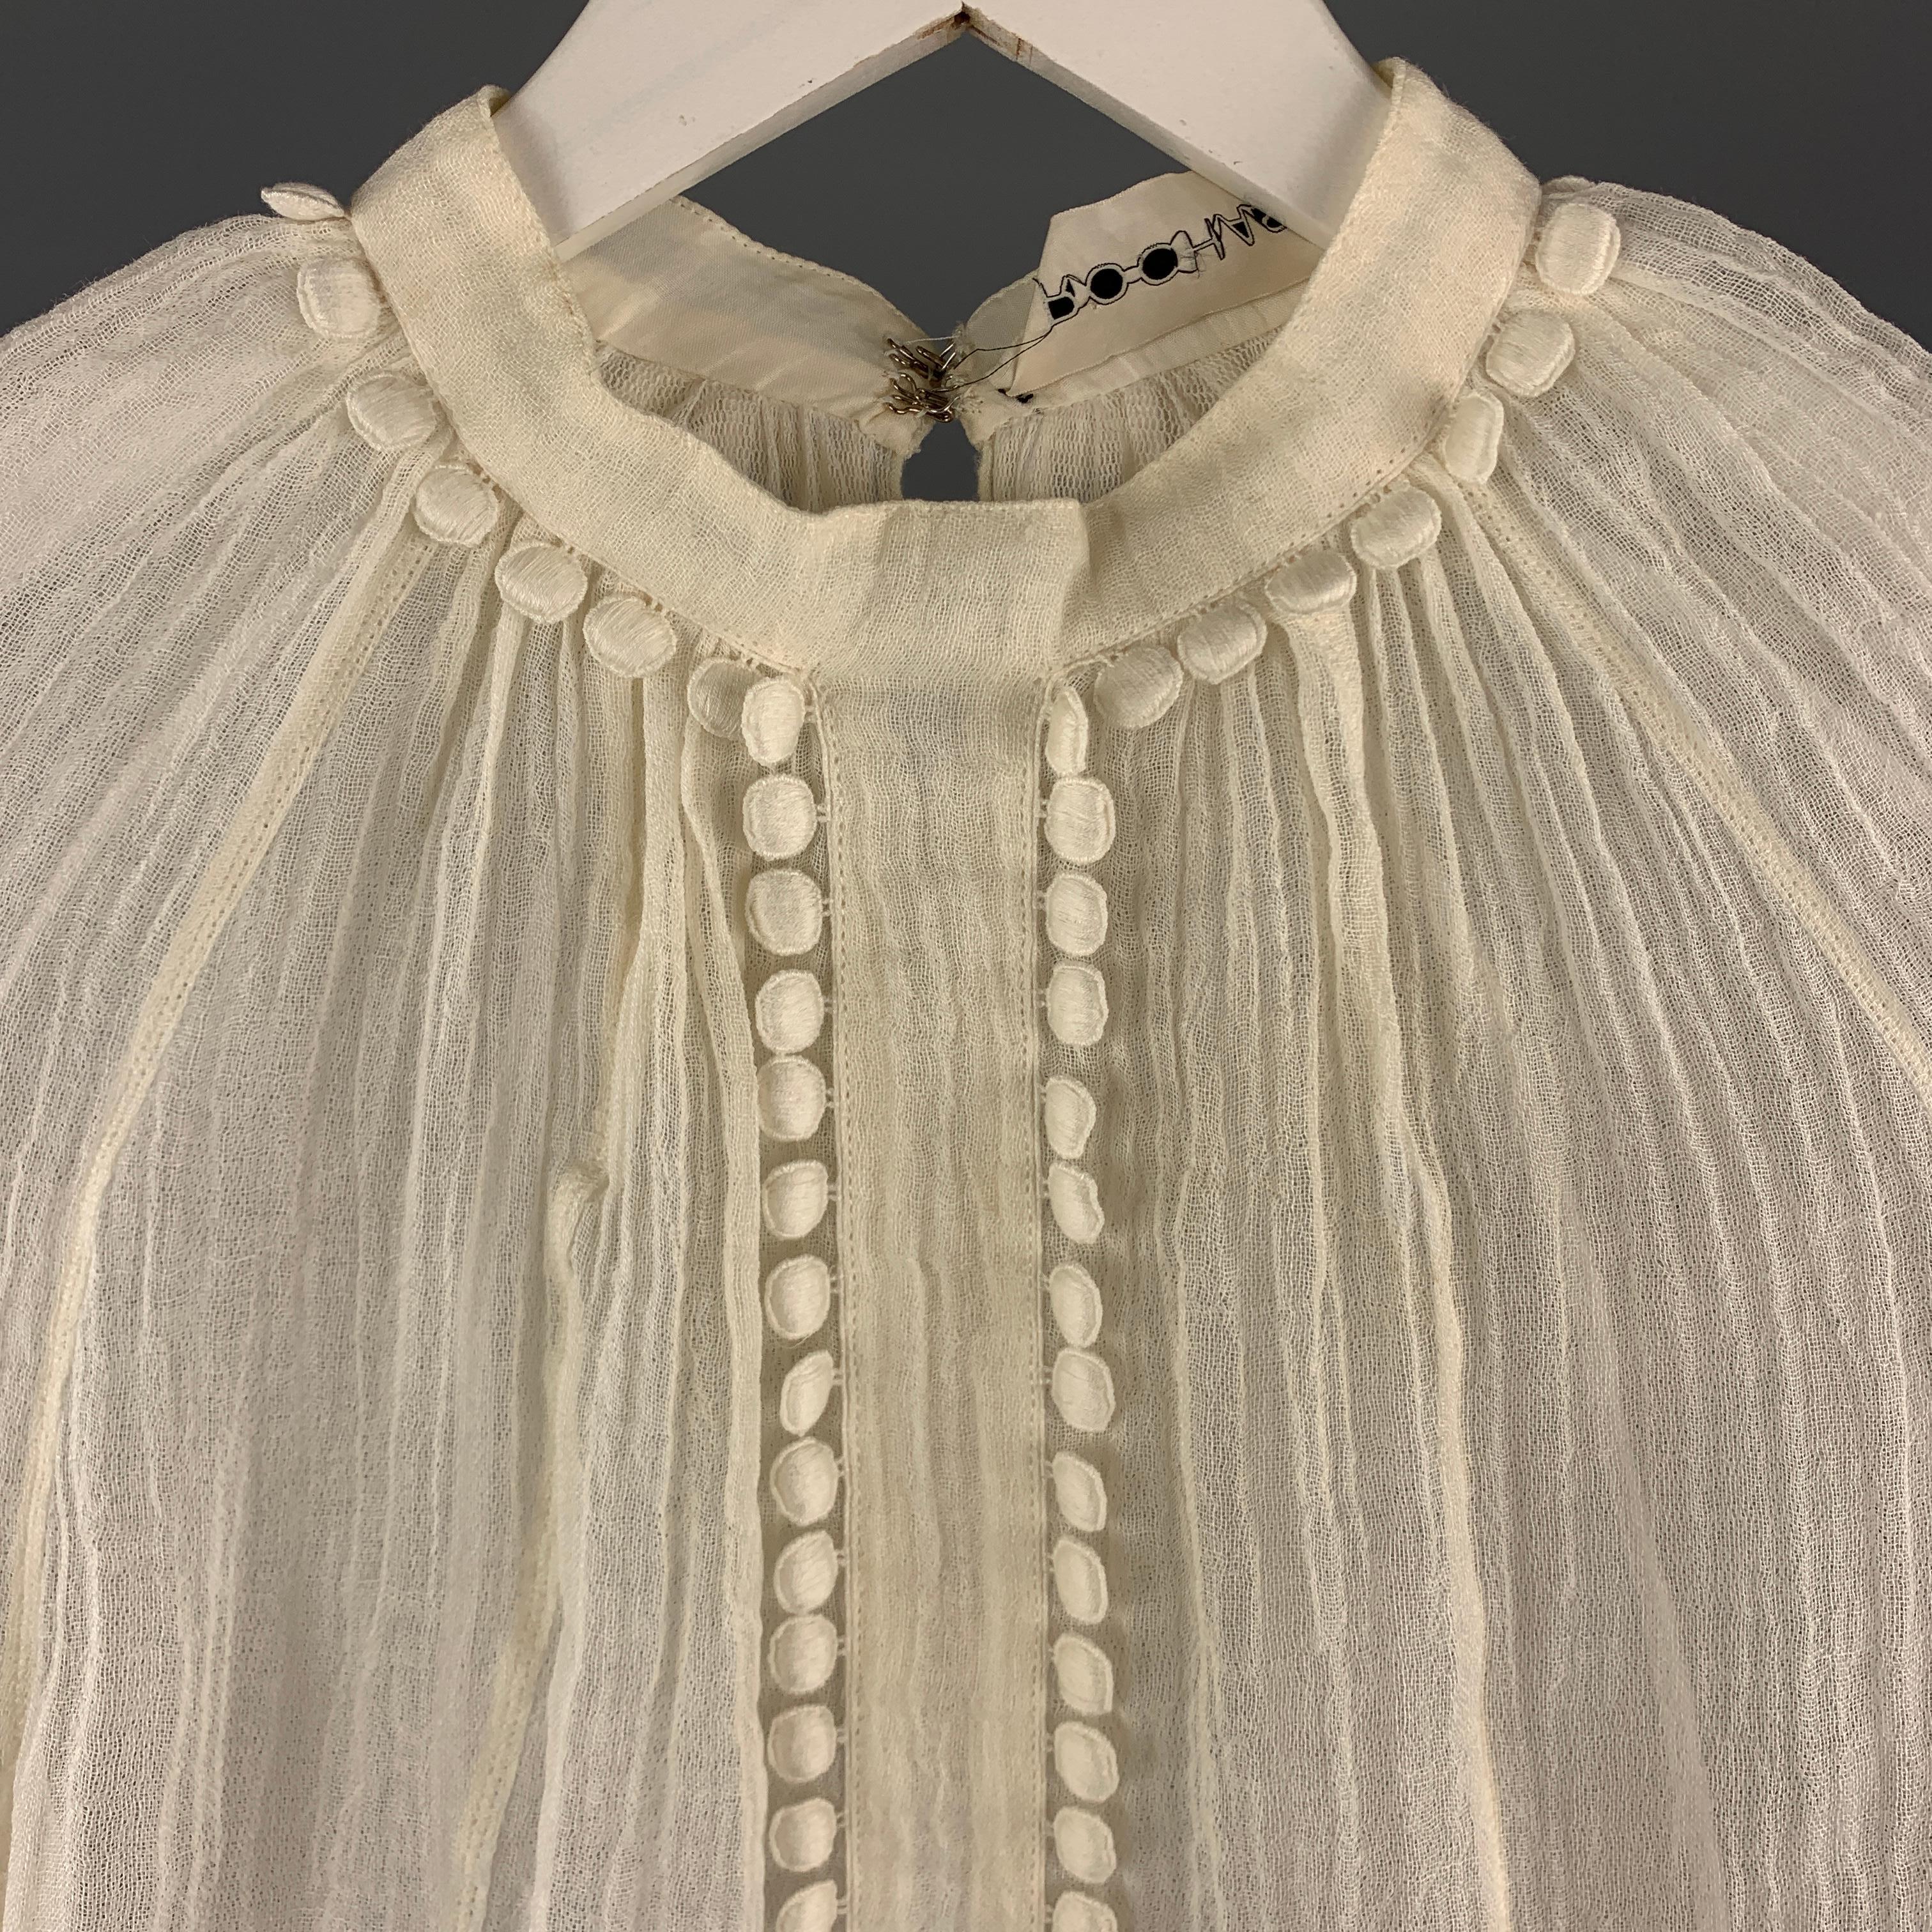 Vintage ROCHAS Blouse comes in a cream tone in a textured see through linen material, with a high collar, embellishment, and raglan long sleeves. As Is. Made in France. 

Very Good Pre-Owned Condition.
Marked: IT 38

Measurements:

Shoulder: 16.5